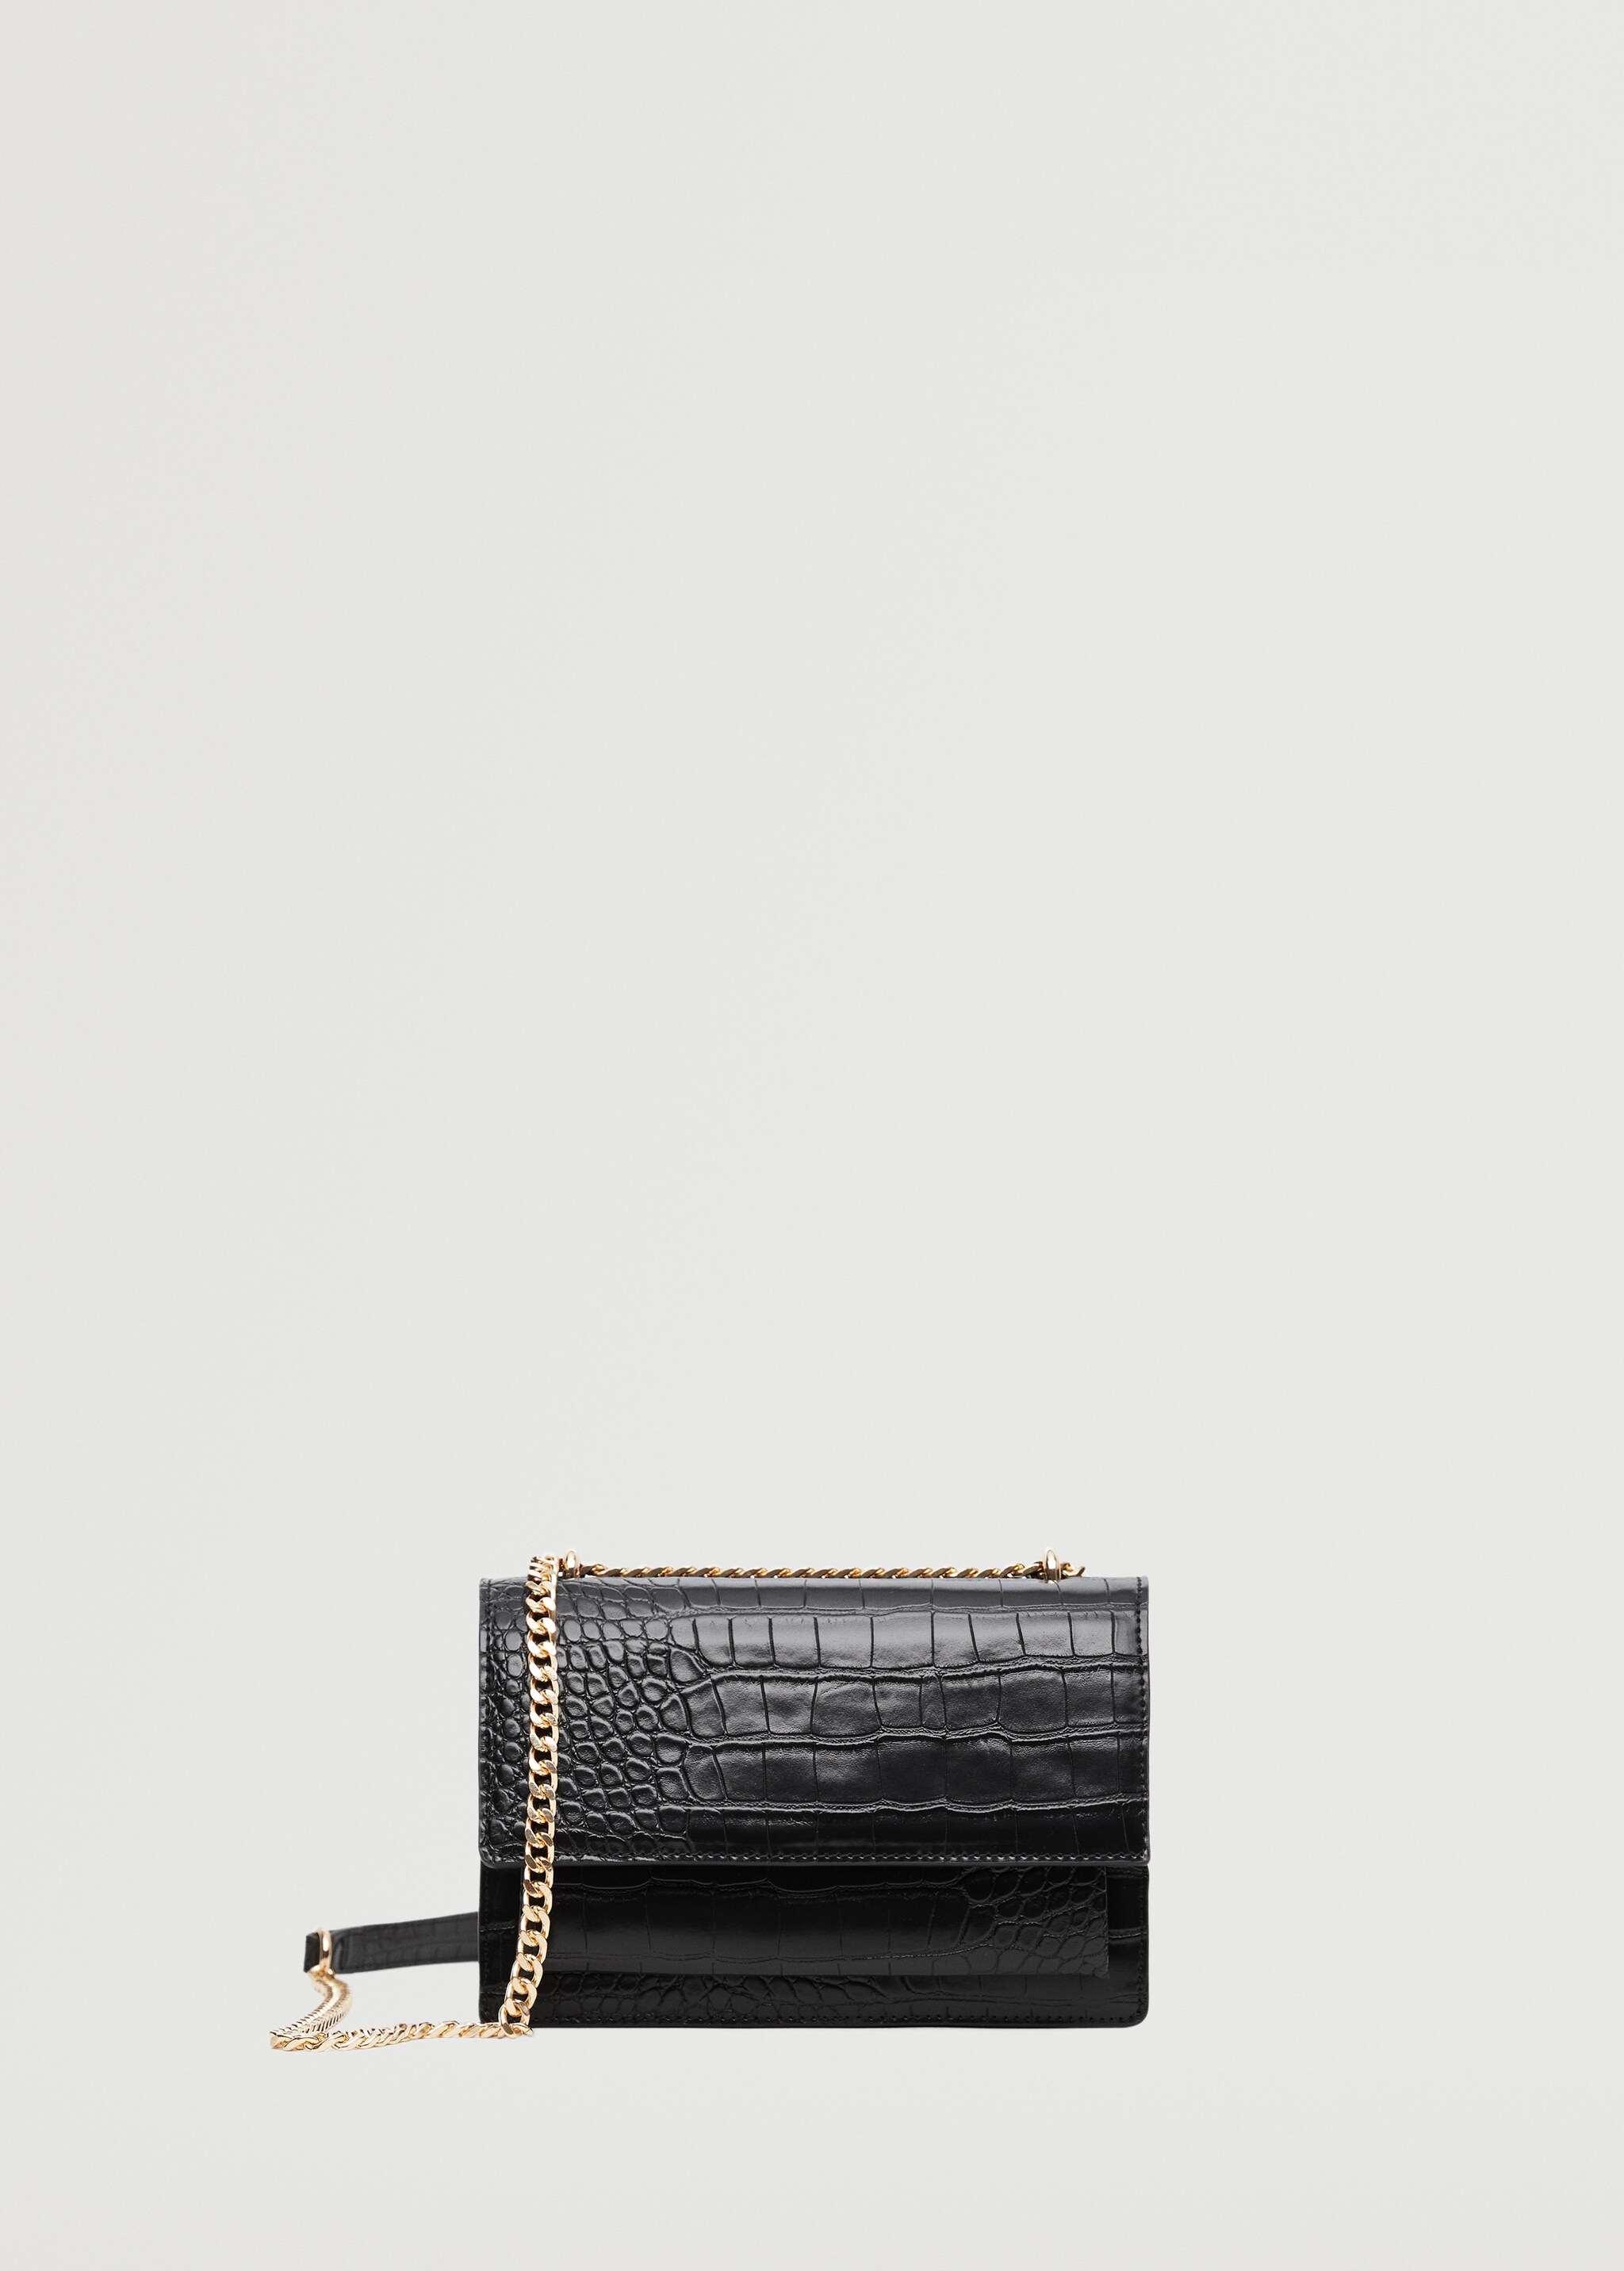 Croco crossbody bag - Article without model